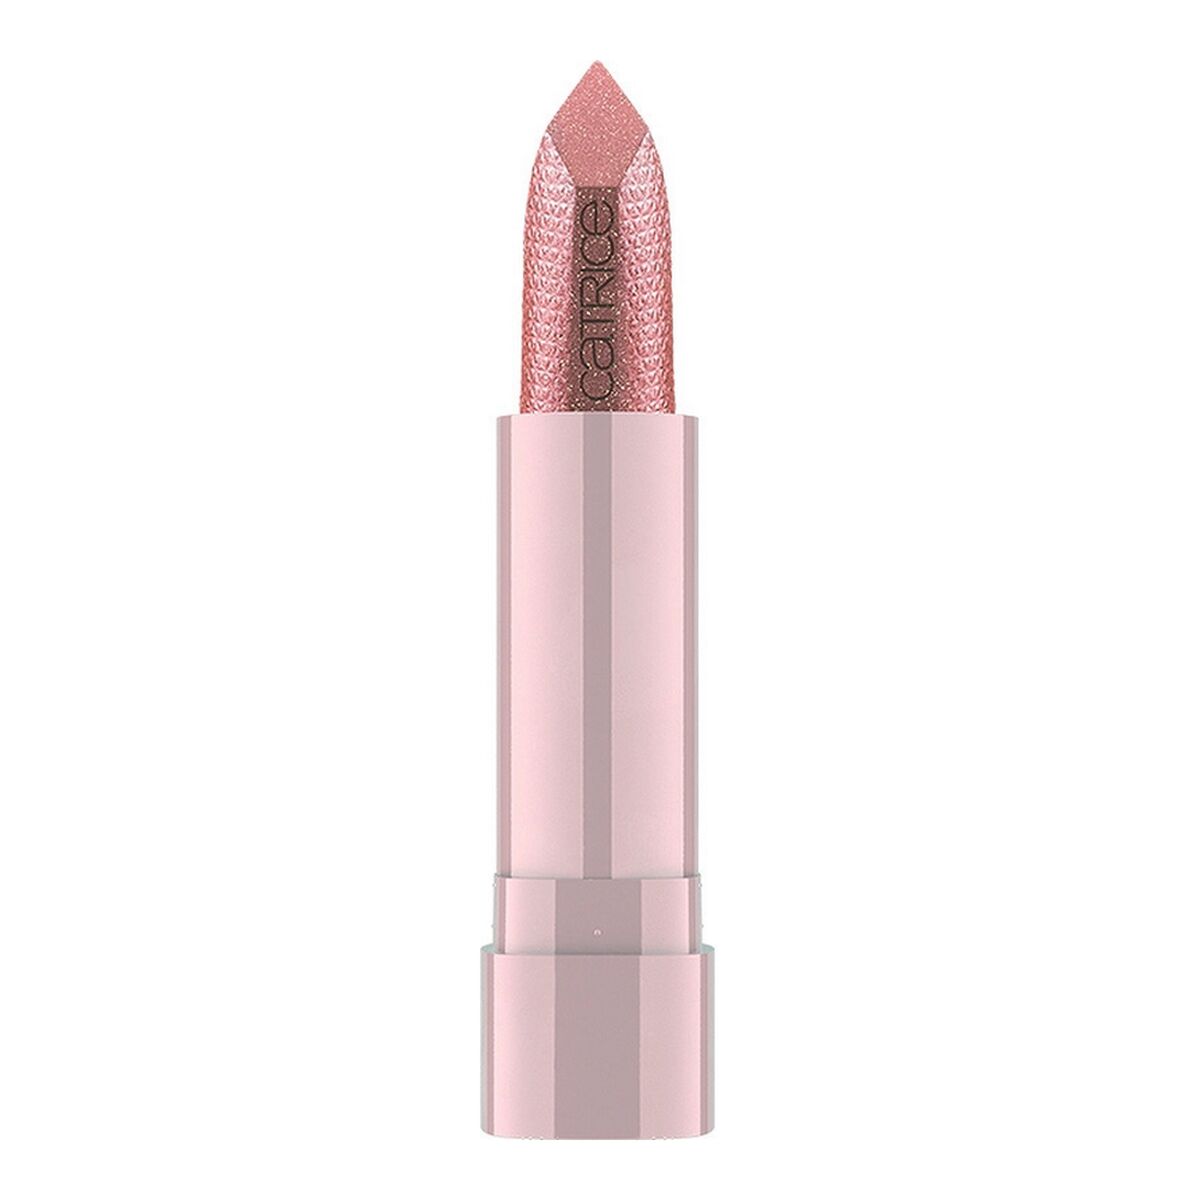 Coloured Lip Balm Catrice N Diamonds 020-rated r-aw 3,5 g